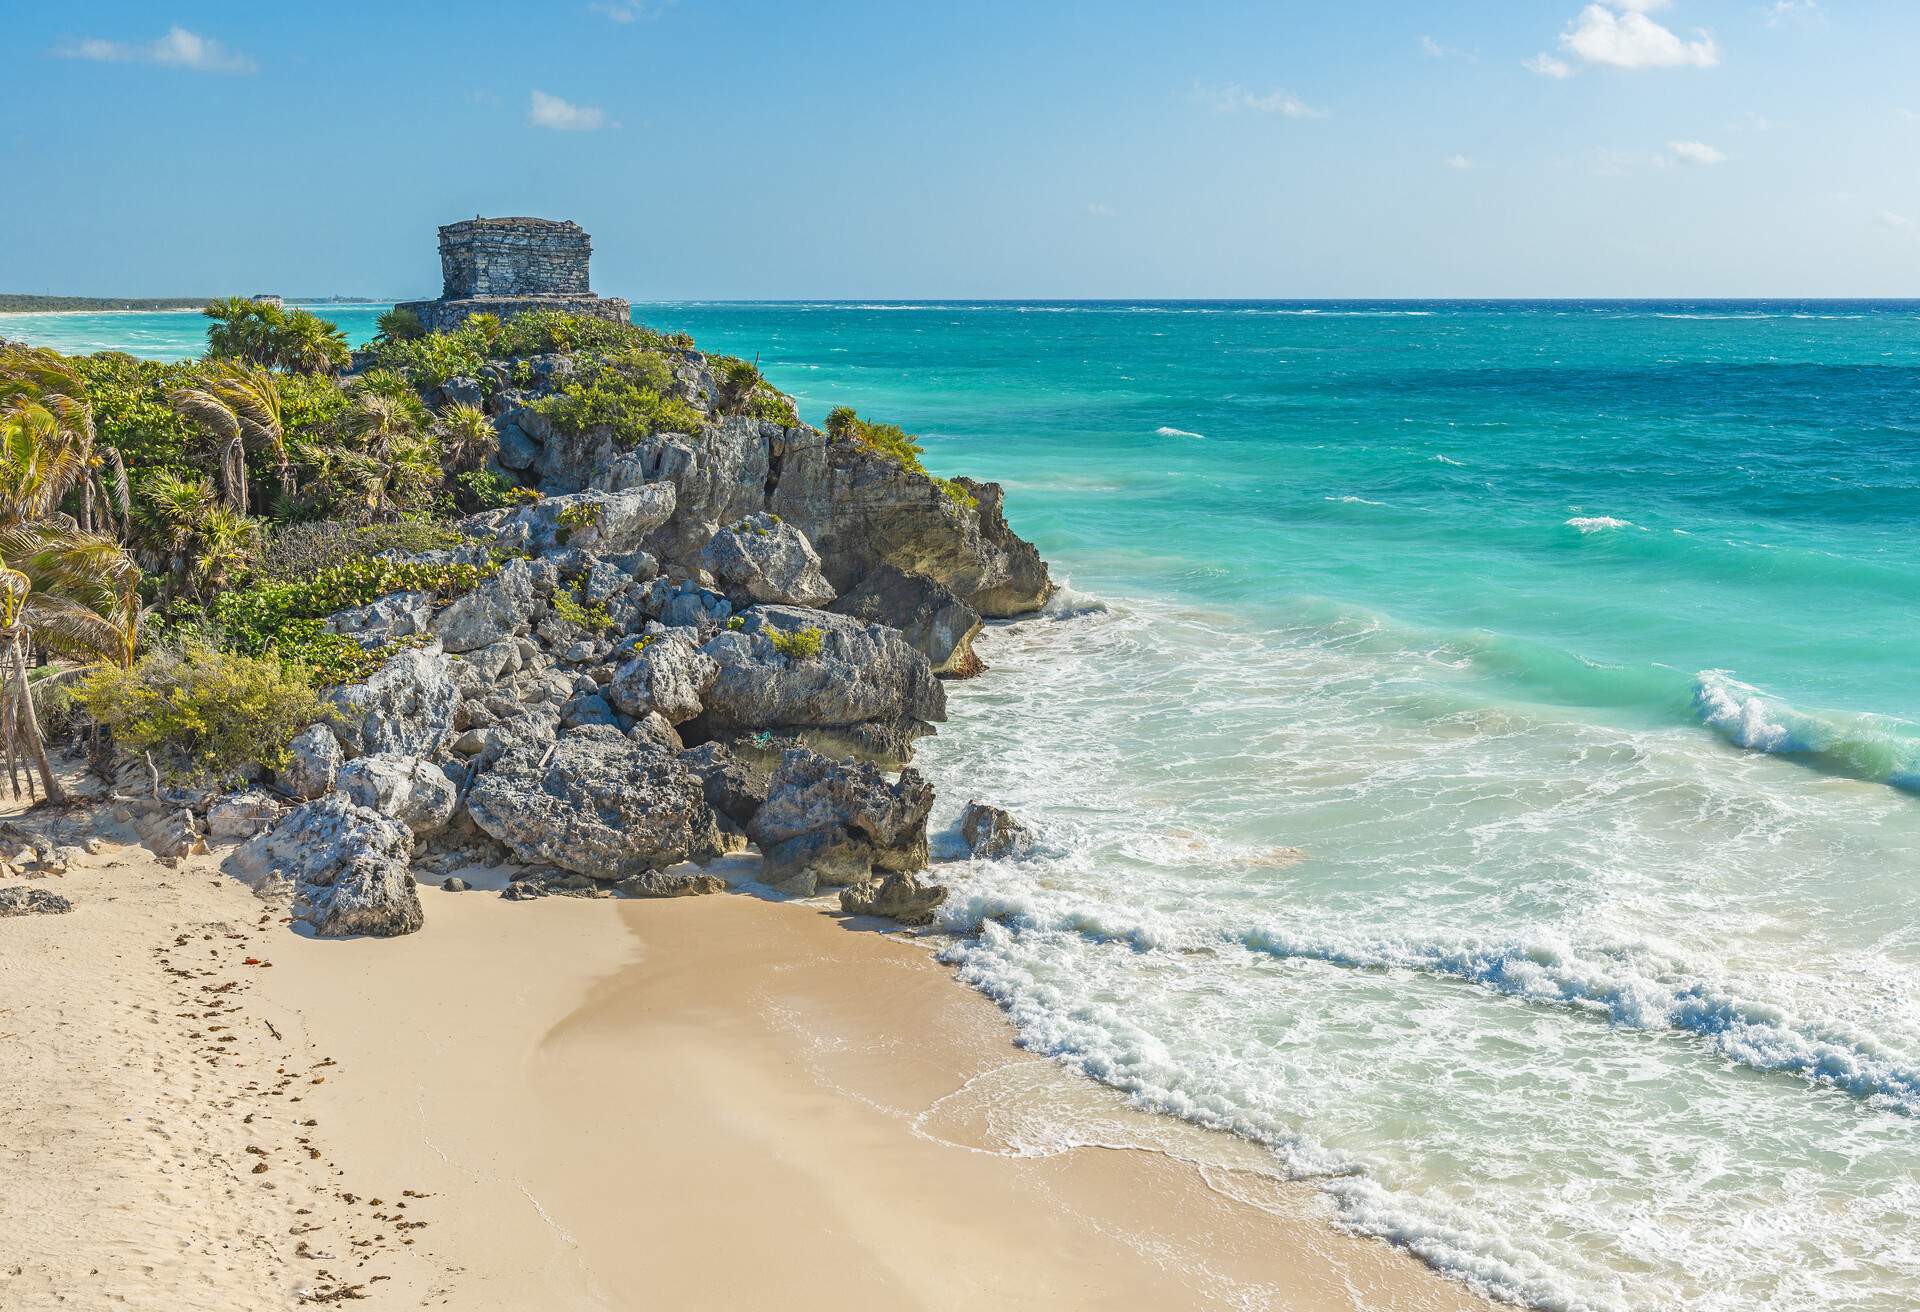 Beach by mayan ruins in Tulum, Mexico